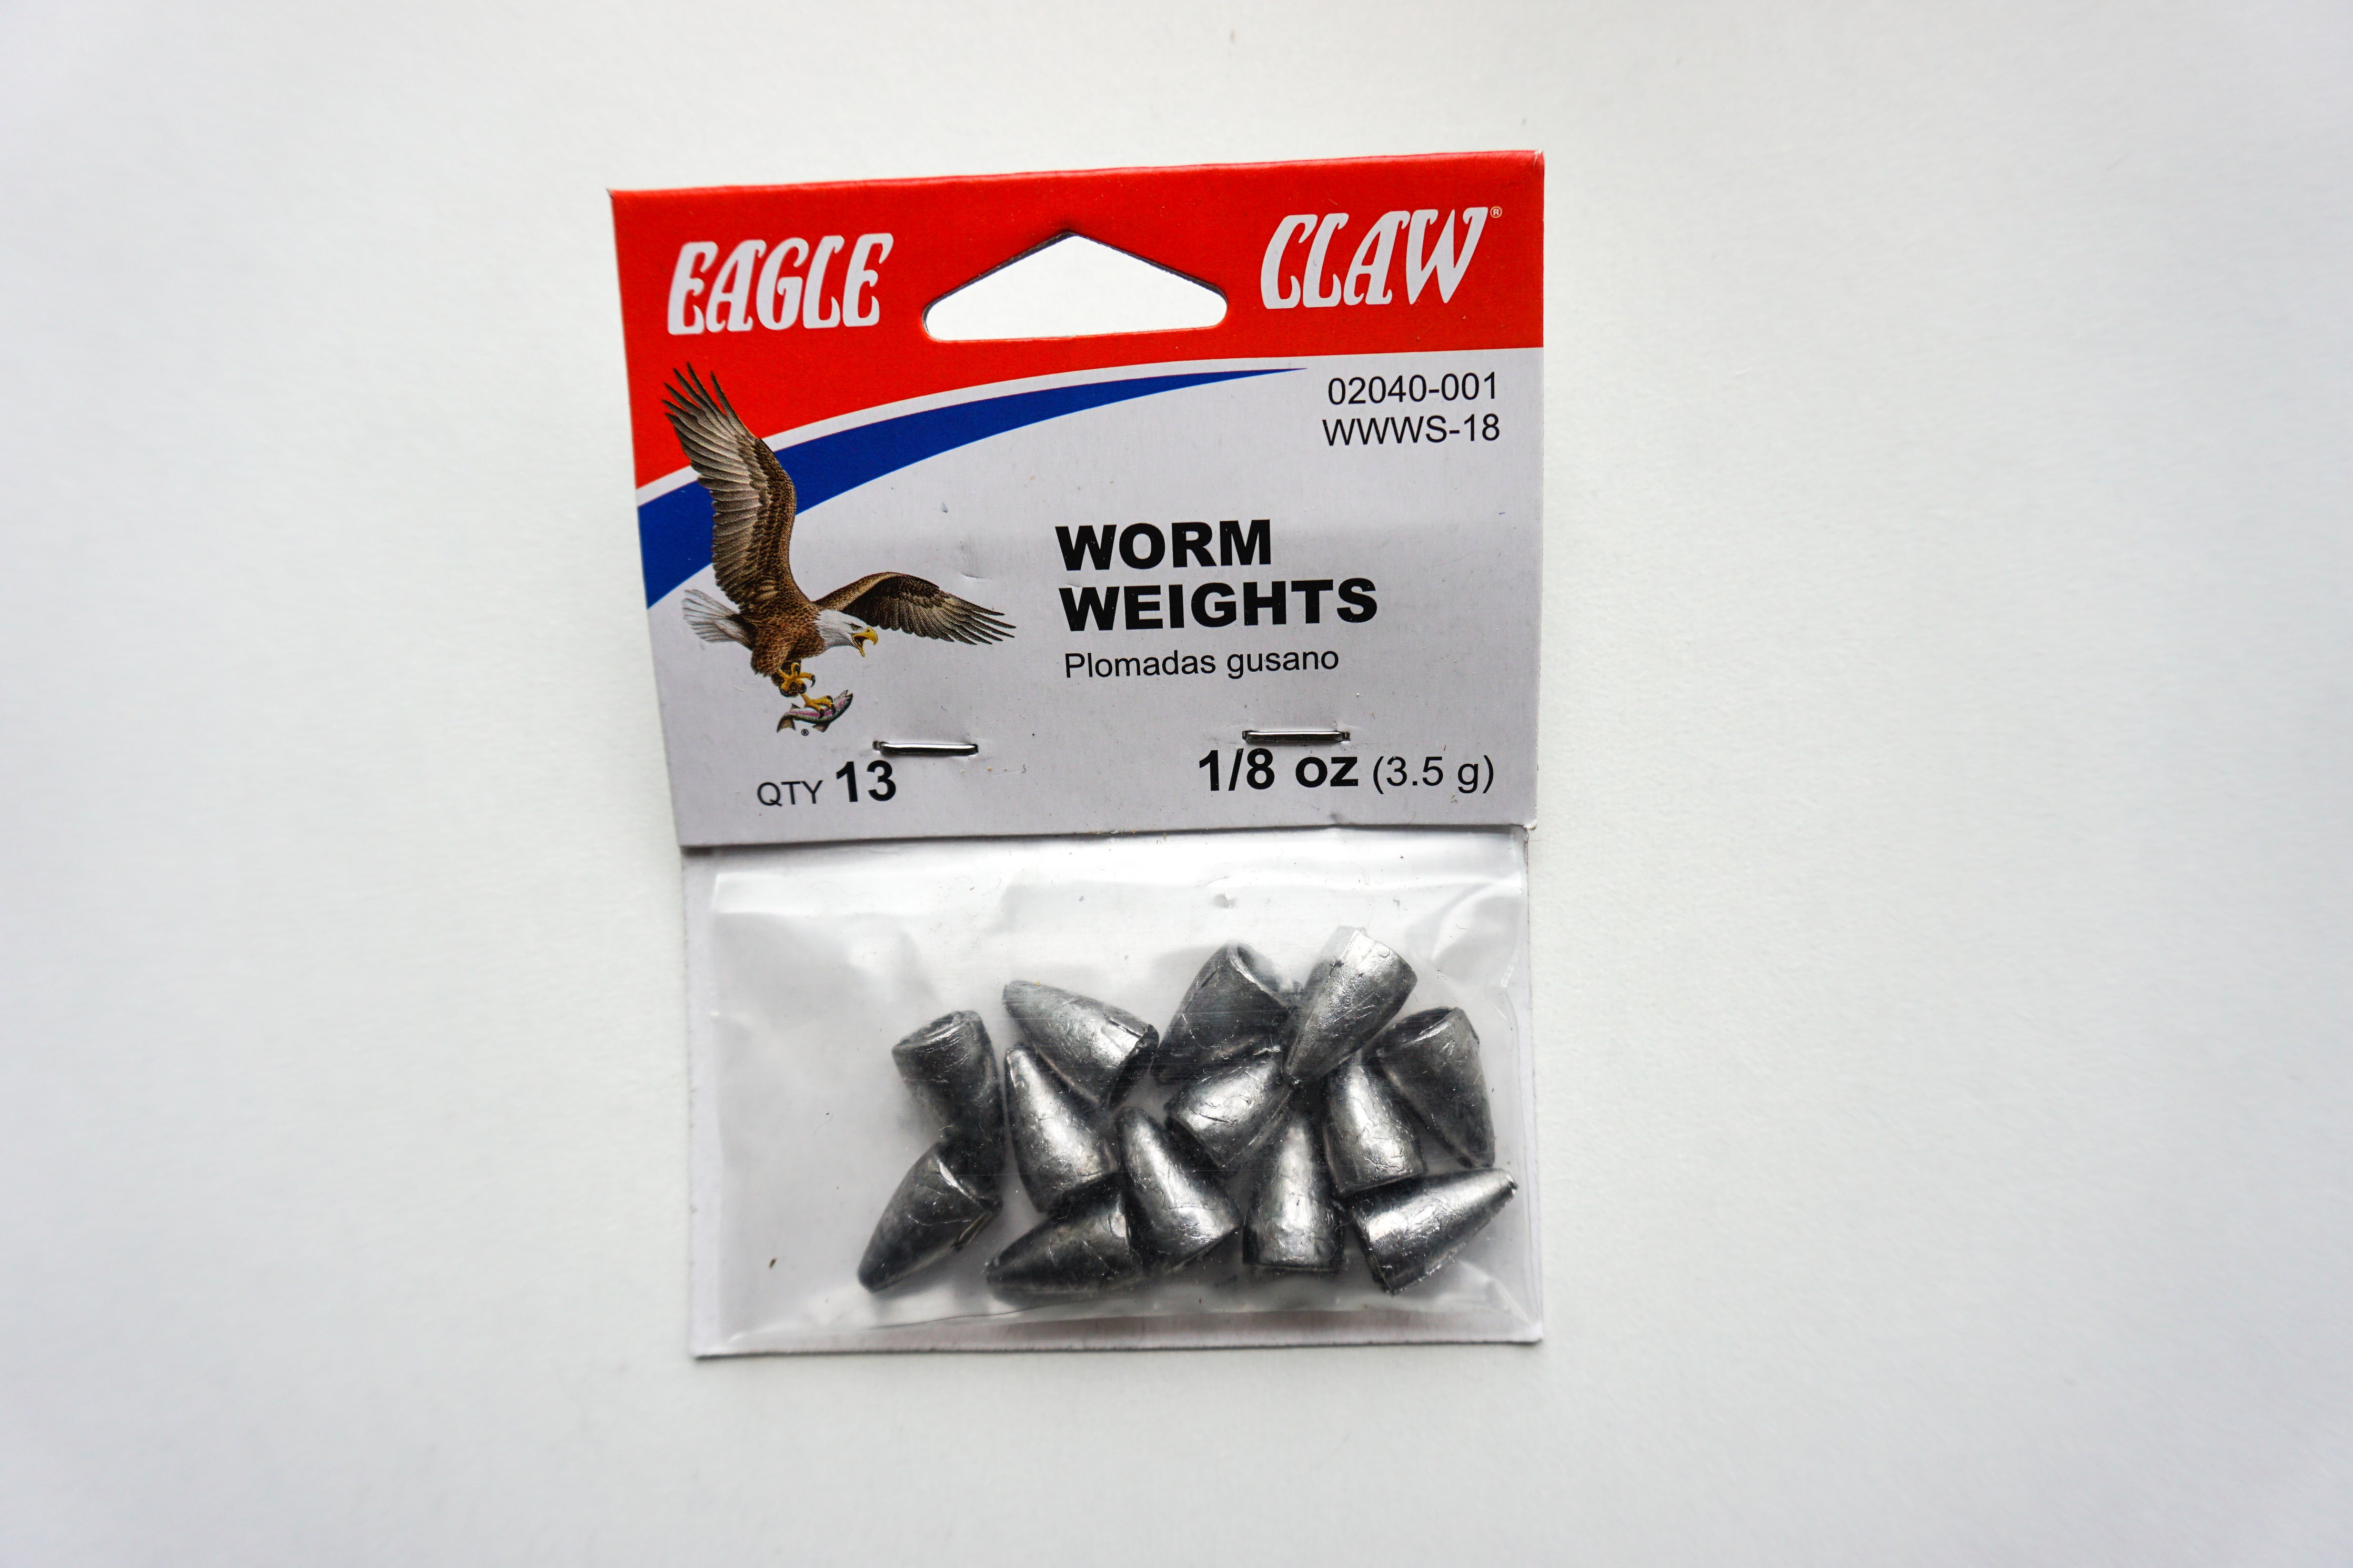 https://cdn.shopify.com/s/files/1/0563/8117/7949/products/worm-weight-18.jpg?v=1645206117